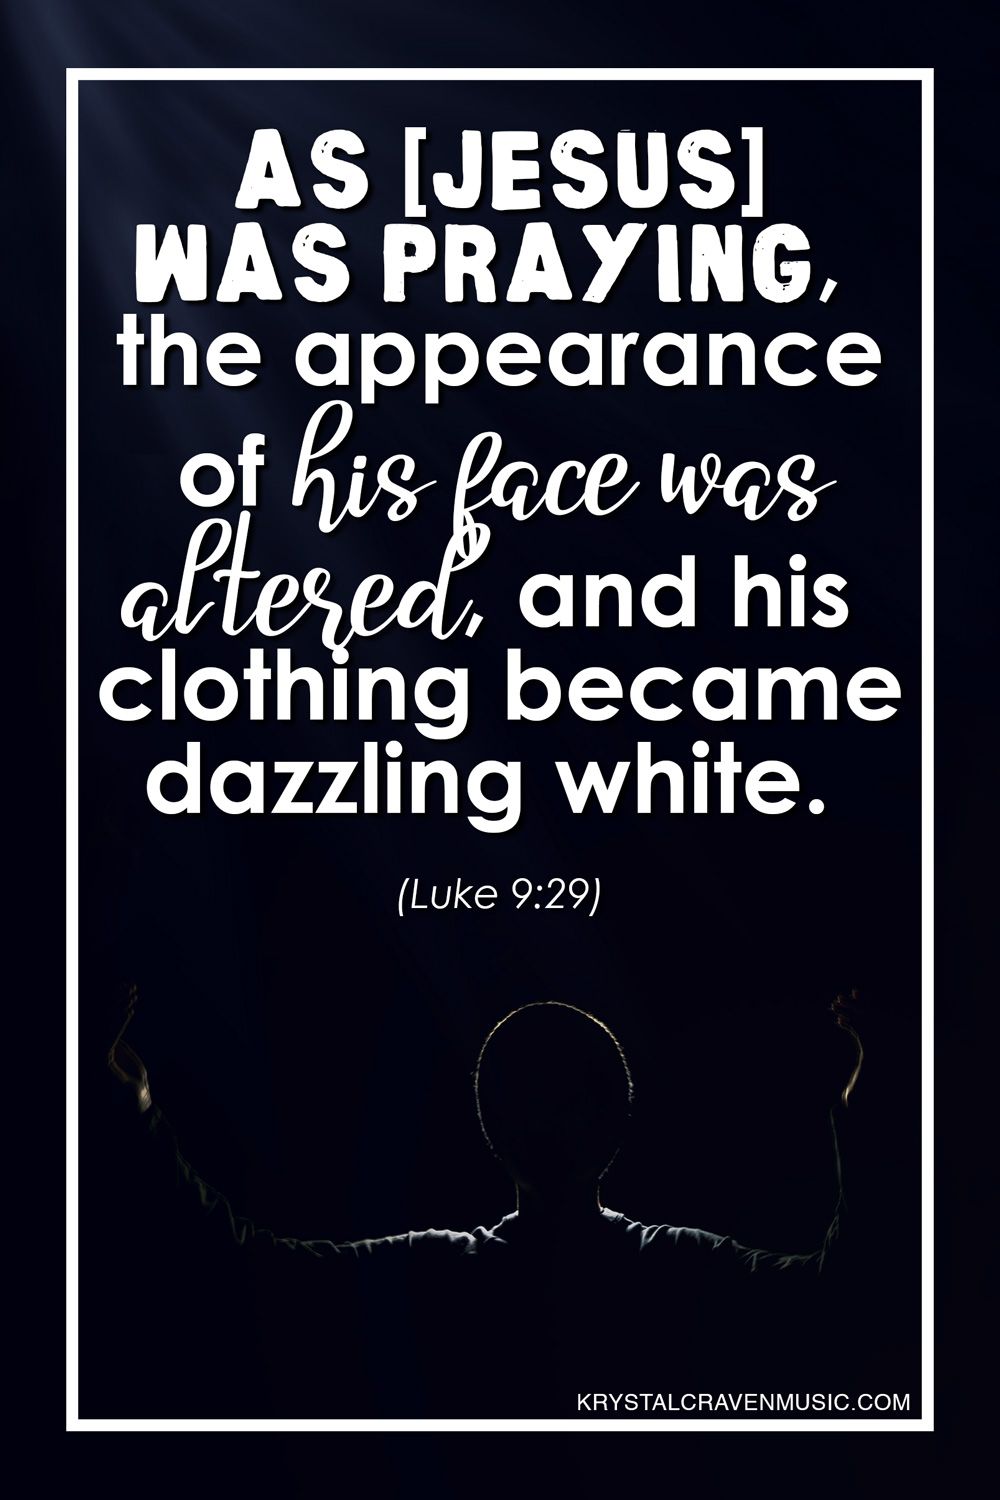 The text from Luke 9:29, As Jeus was praying, the appearance of his face was altered, and his clothing became dazzling white. The text is overlaying a man in the darkness of night with hands raised and light shining around him.